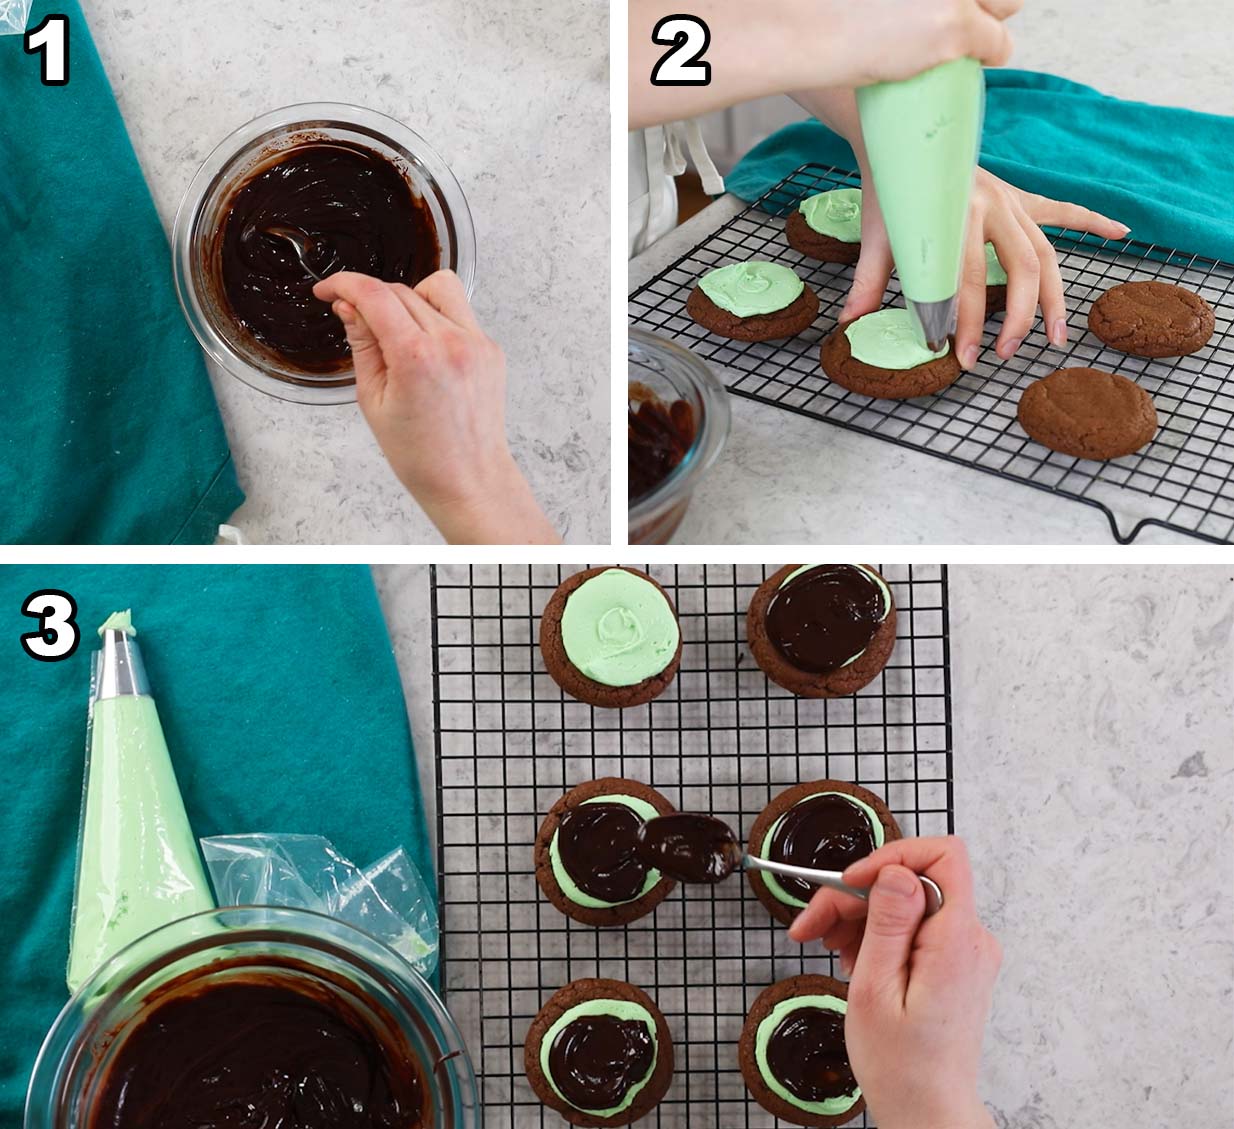 Three photos showing chocolate ganache being prepared, mint frosting being added to chocolate cookies, and ganache being spooned overtop.